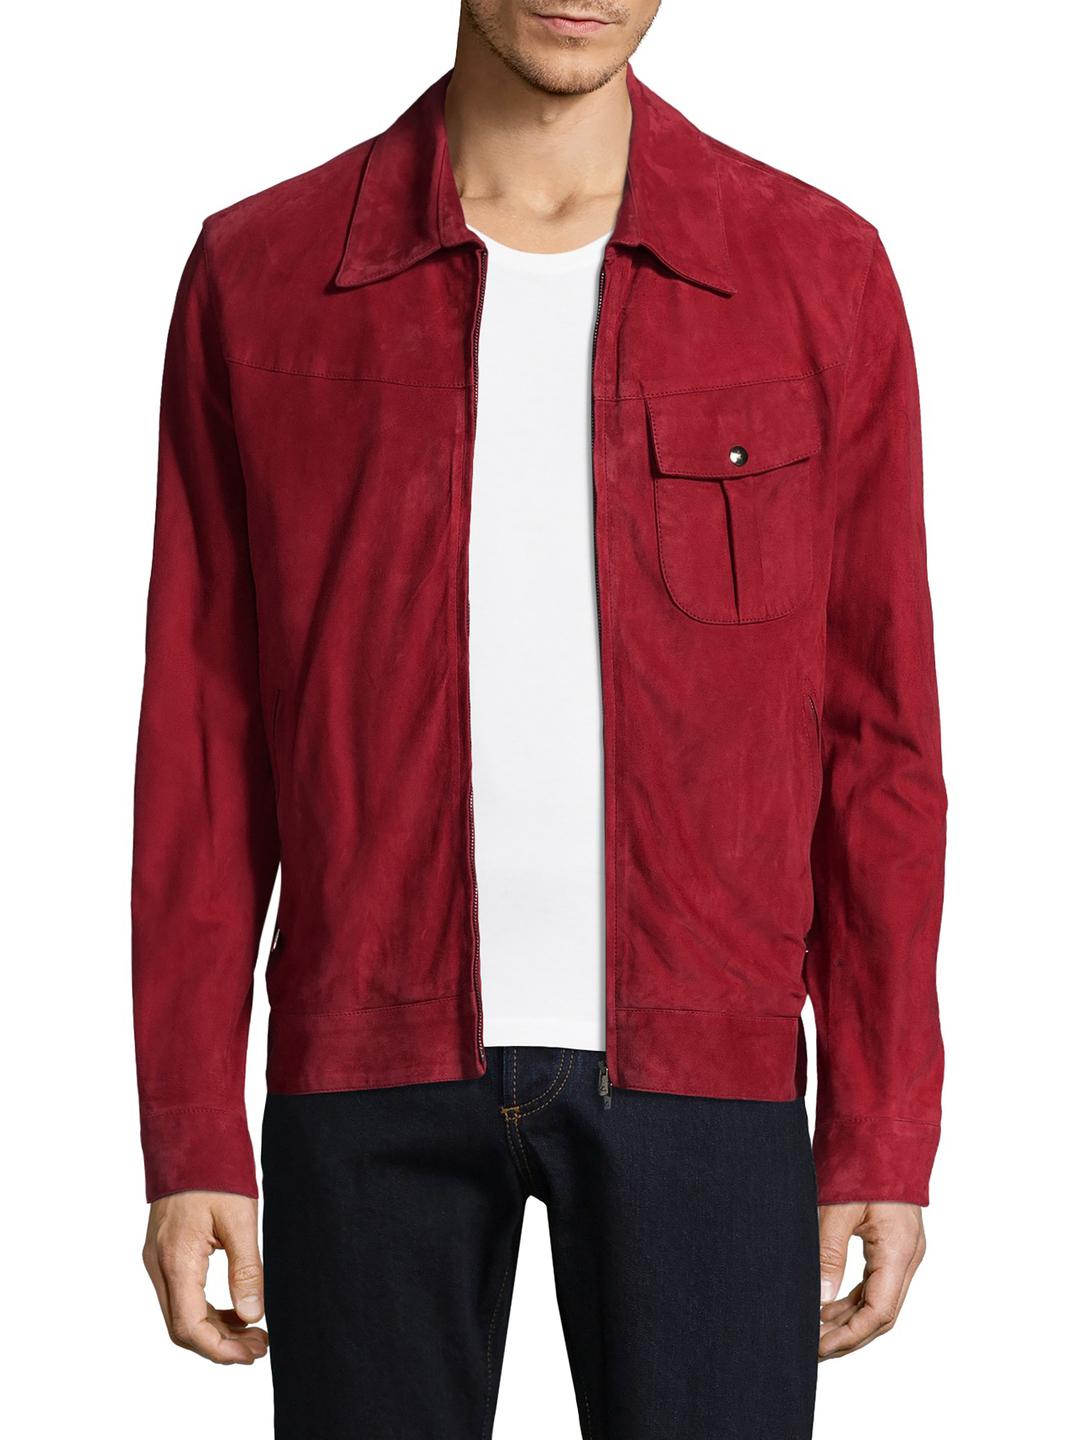 Lyst - Isaia Spread Collar Jacket in Red for Men